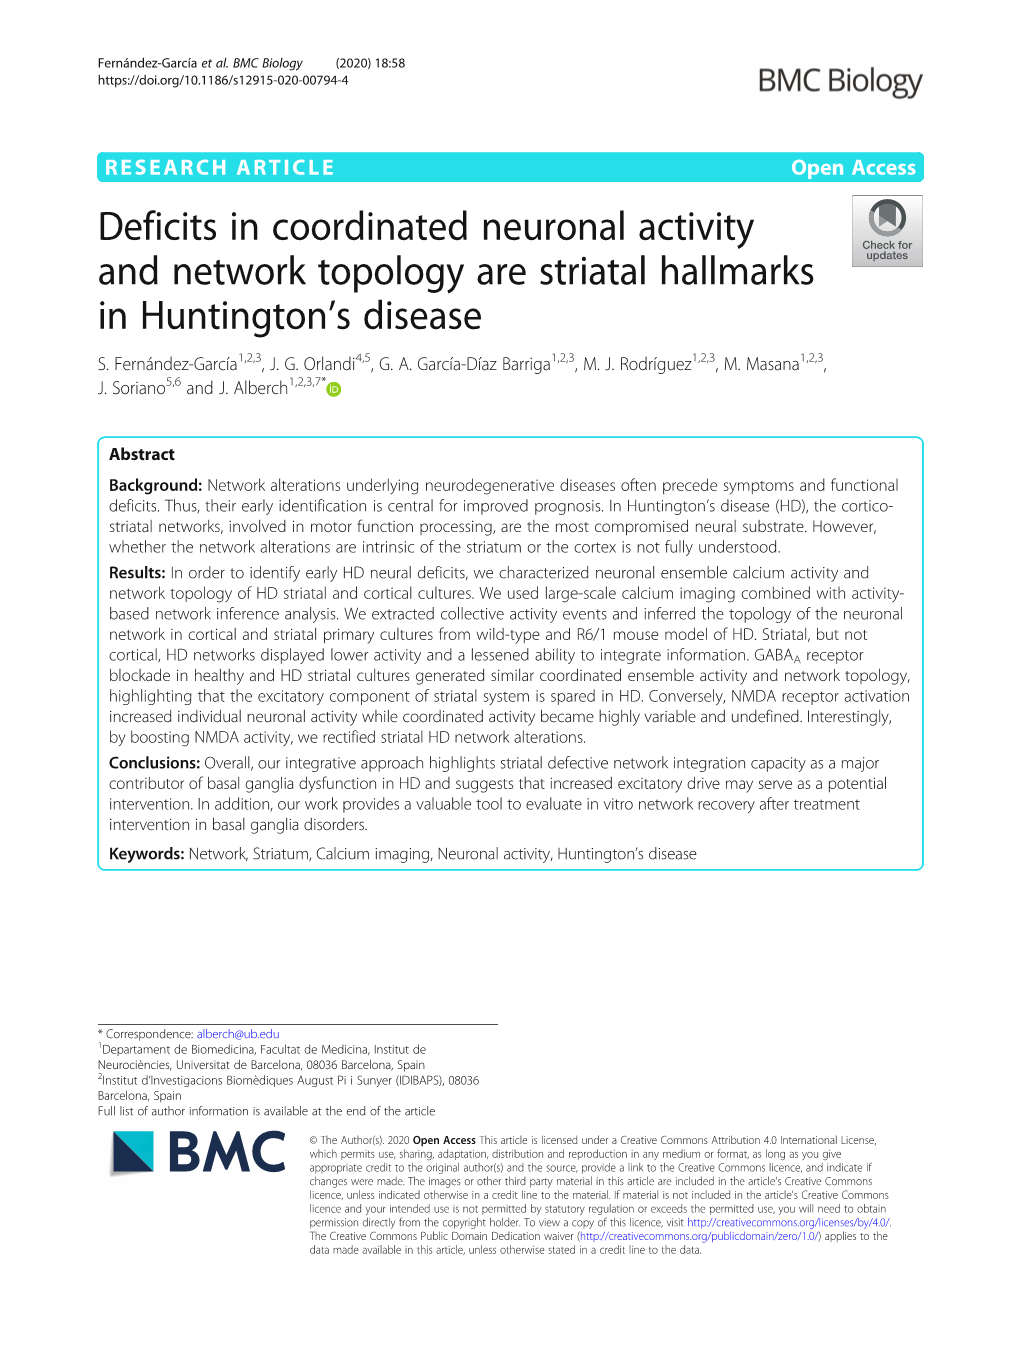 Deficits in Coordinated Neuronal Activity and Network Topology Are Striatal Hallmarks in Huntington's Disease